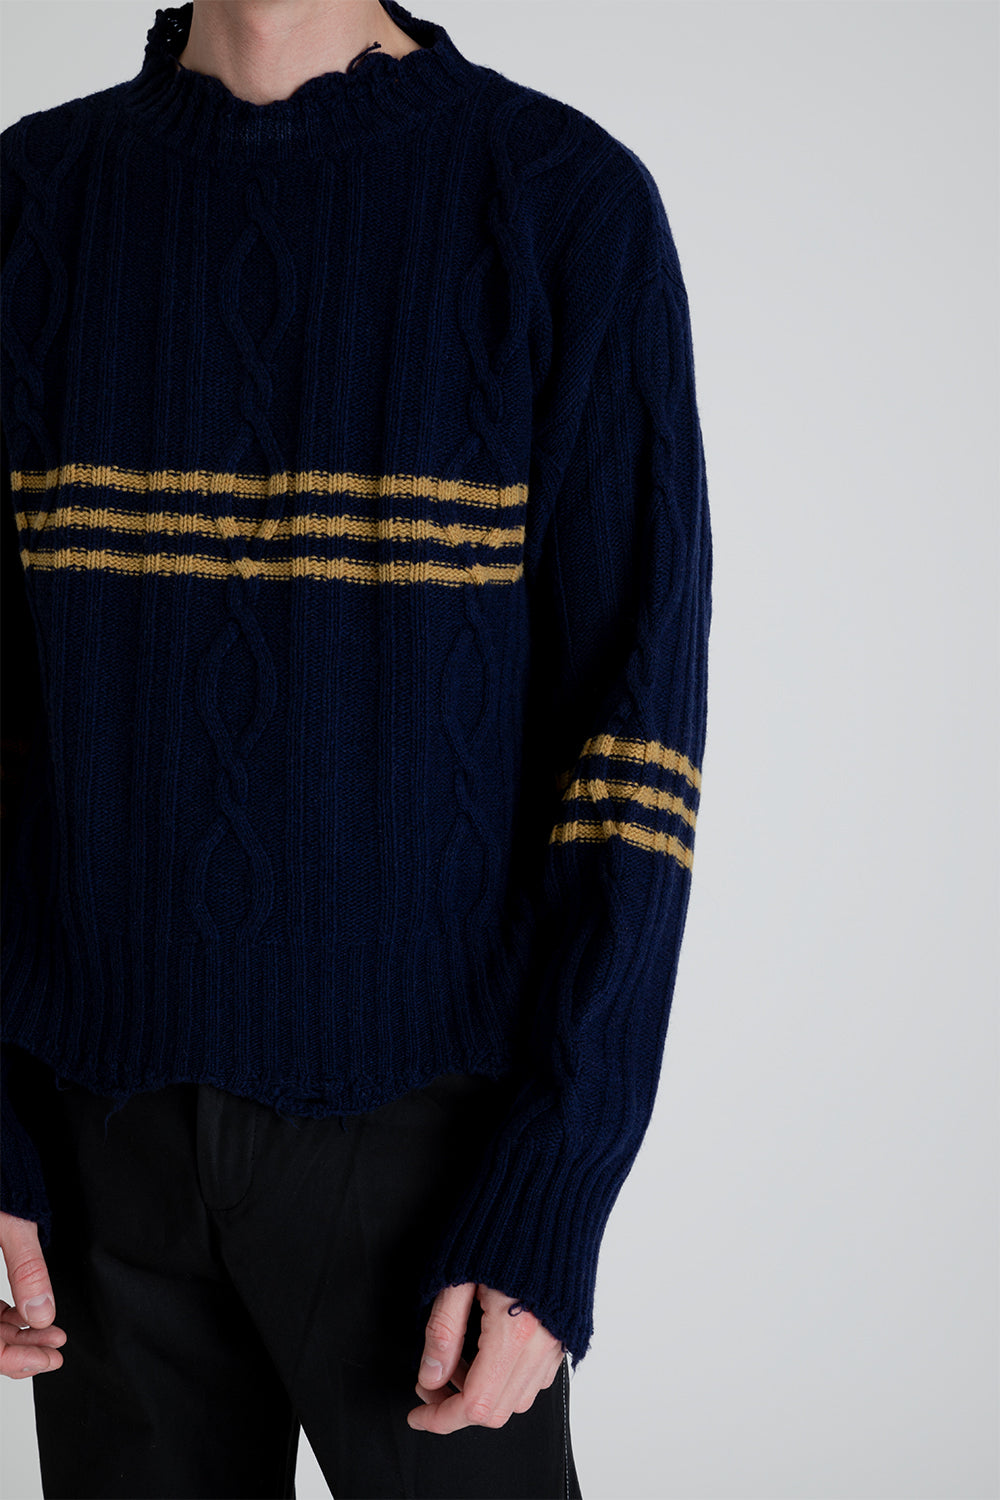 Schnayderman's Cropped Cable Sweater in Dark Blue / Yellow